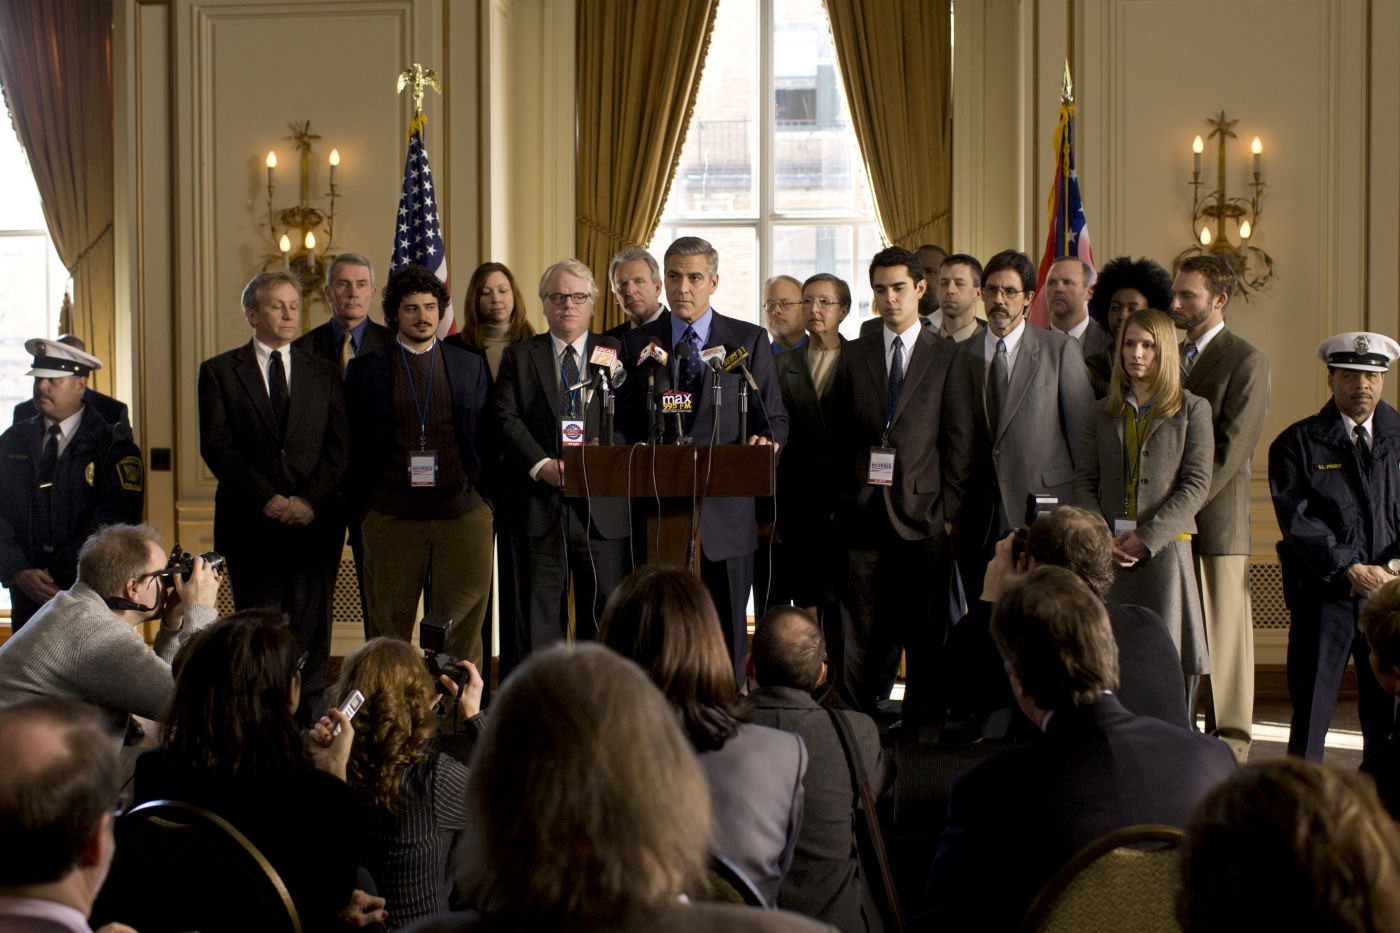 Philip Seymour Hoffman, George Clooney and Max Minghella in Columbia Pictures' The Ides of March (2011)